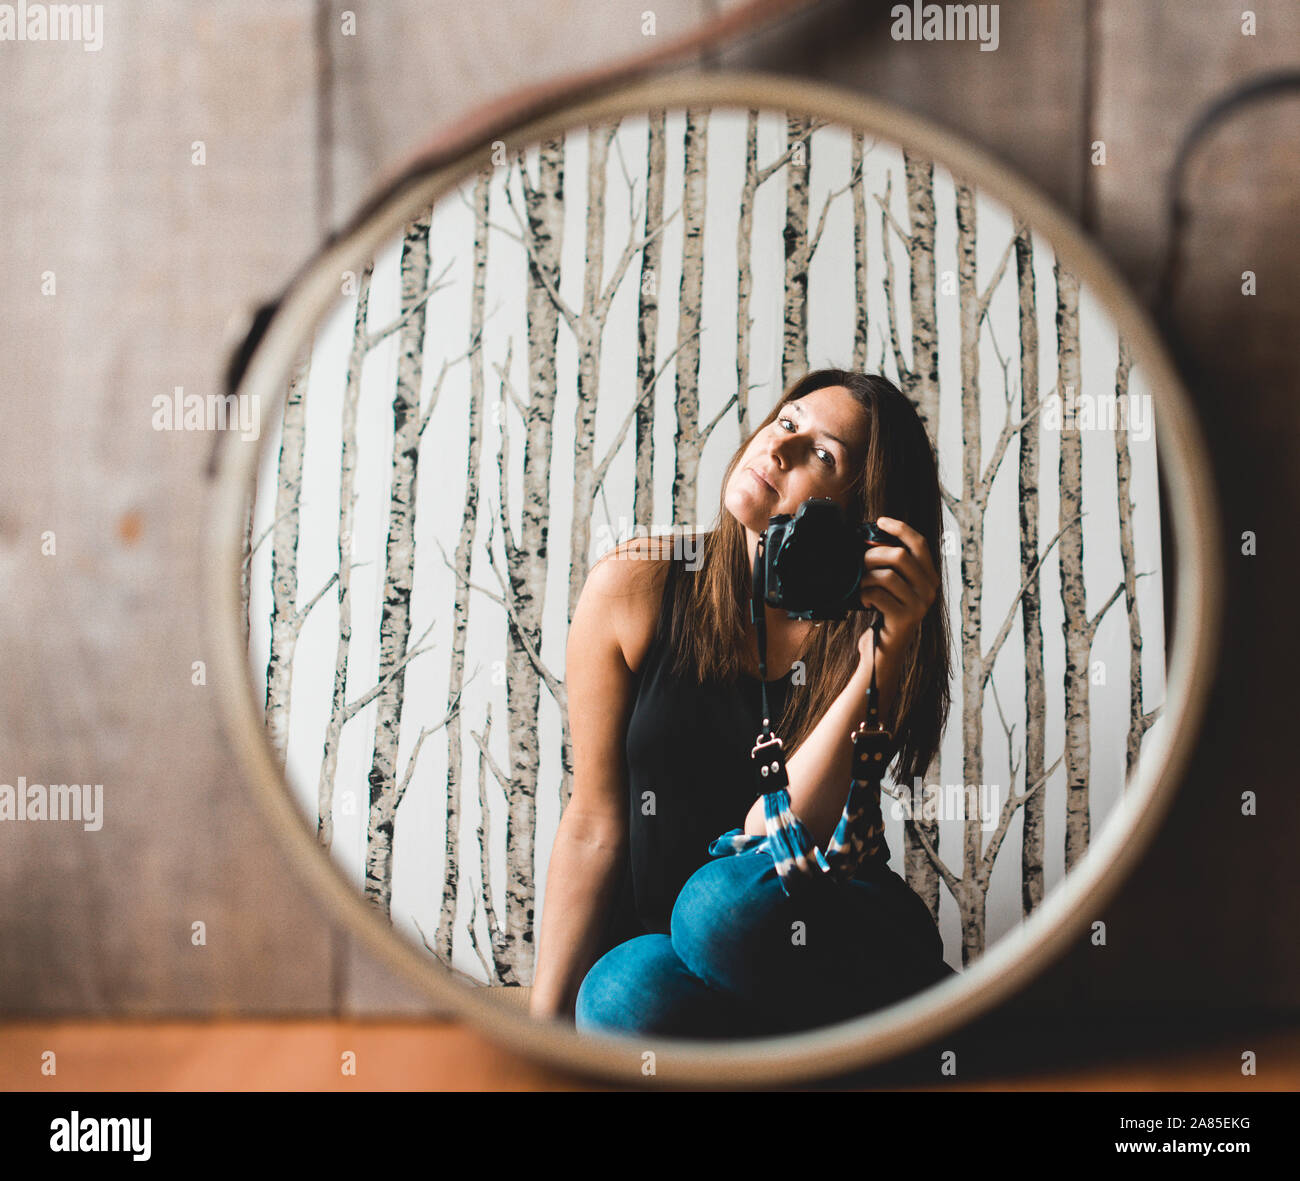 Woman holding camera taking photo of her reflection in the mirror. Stock Photo